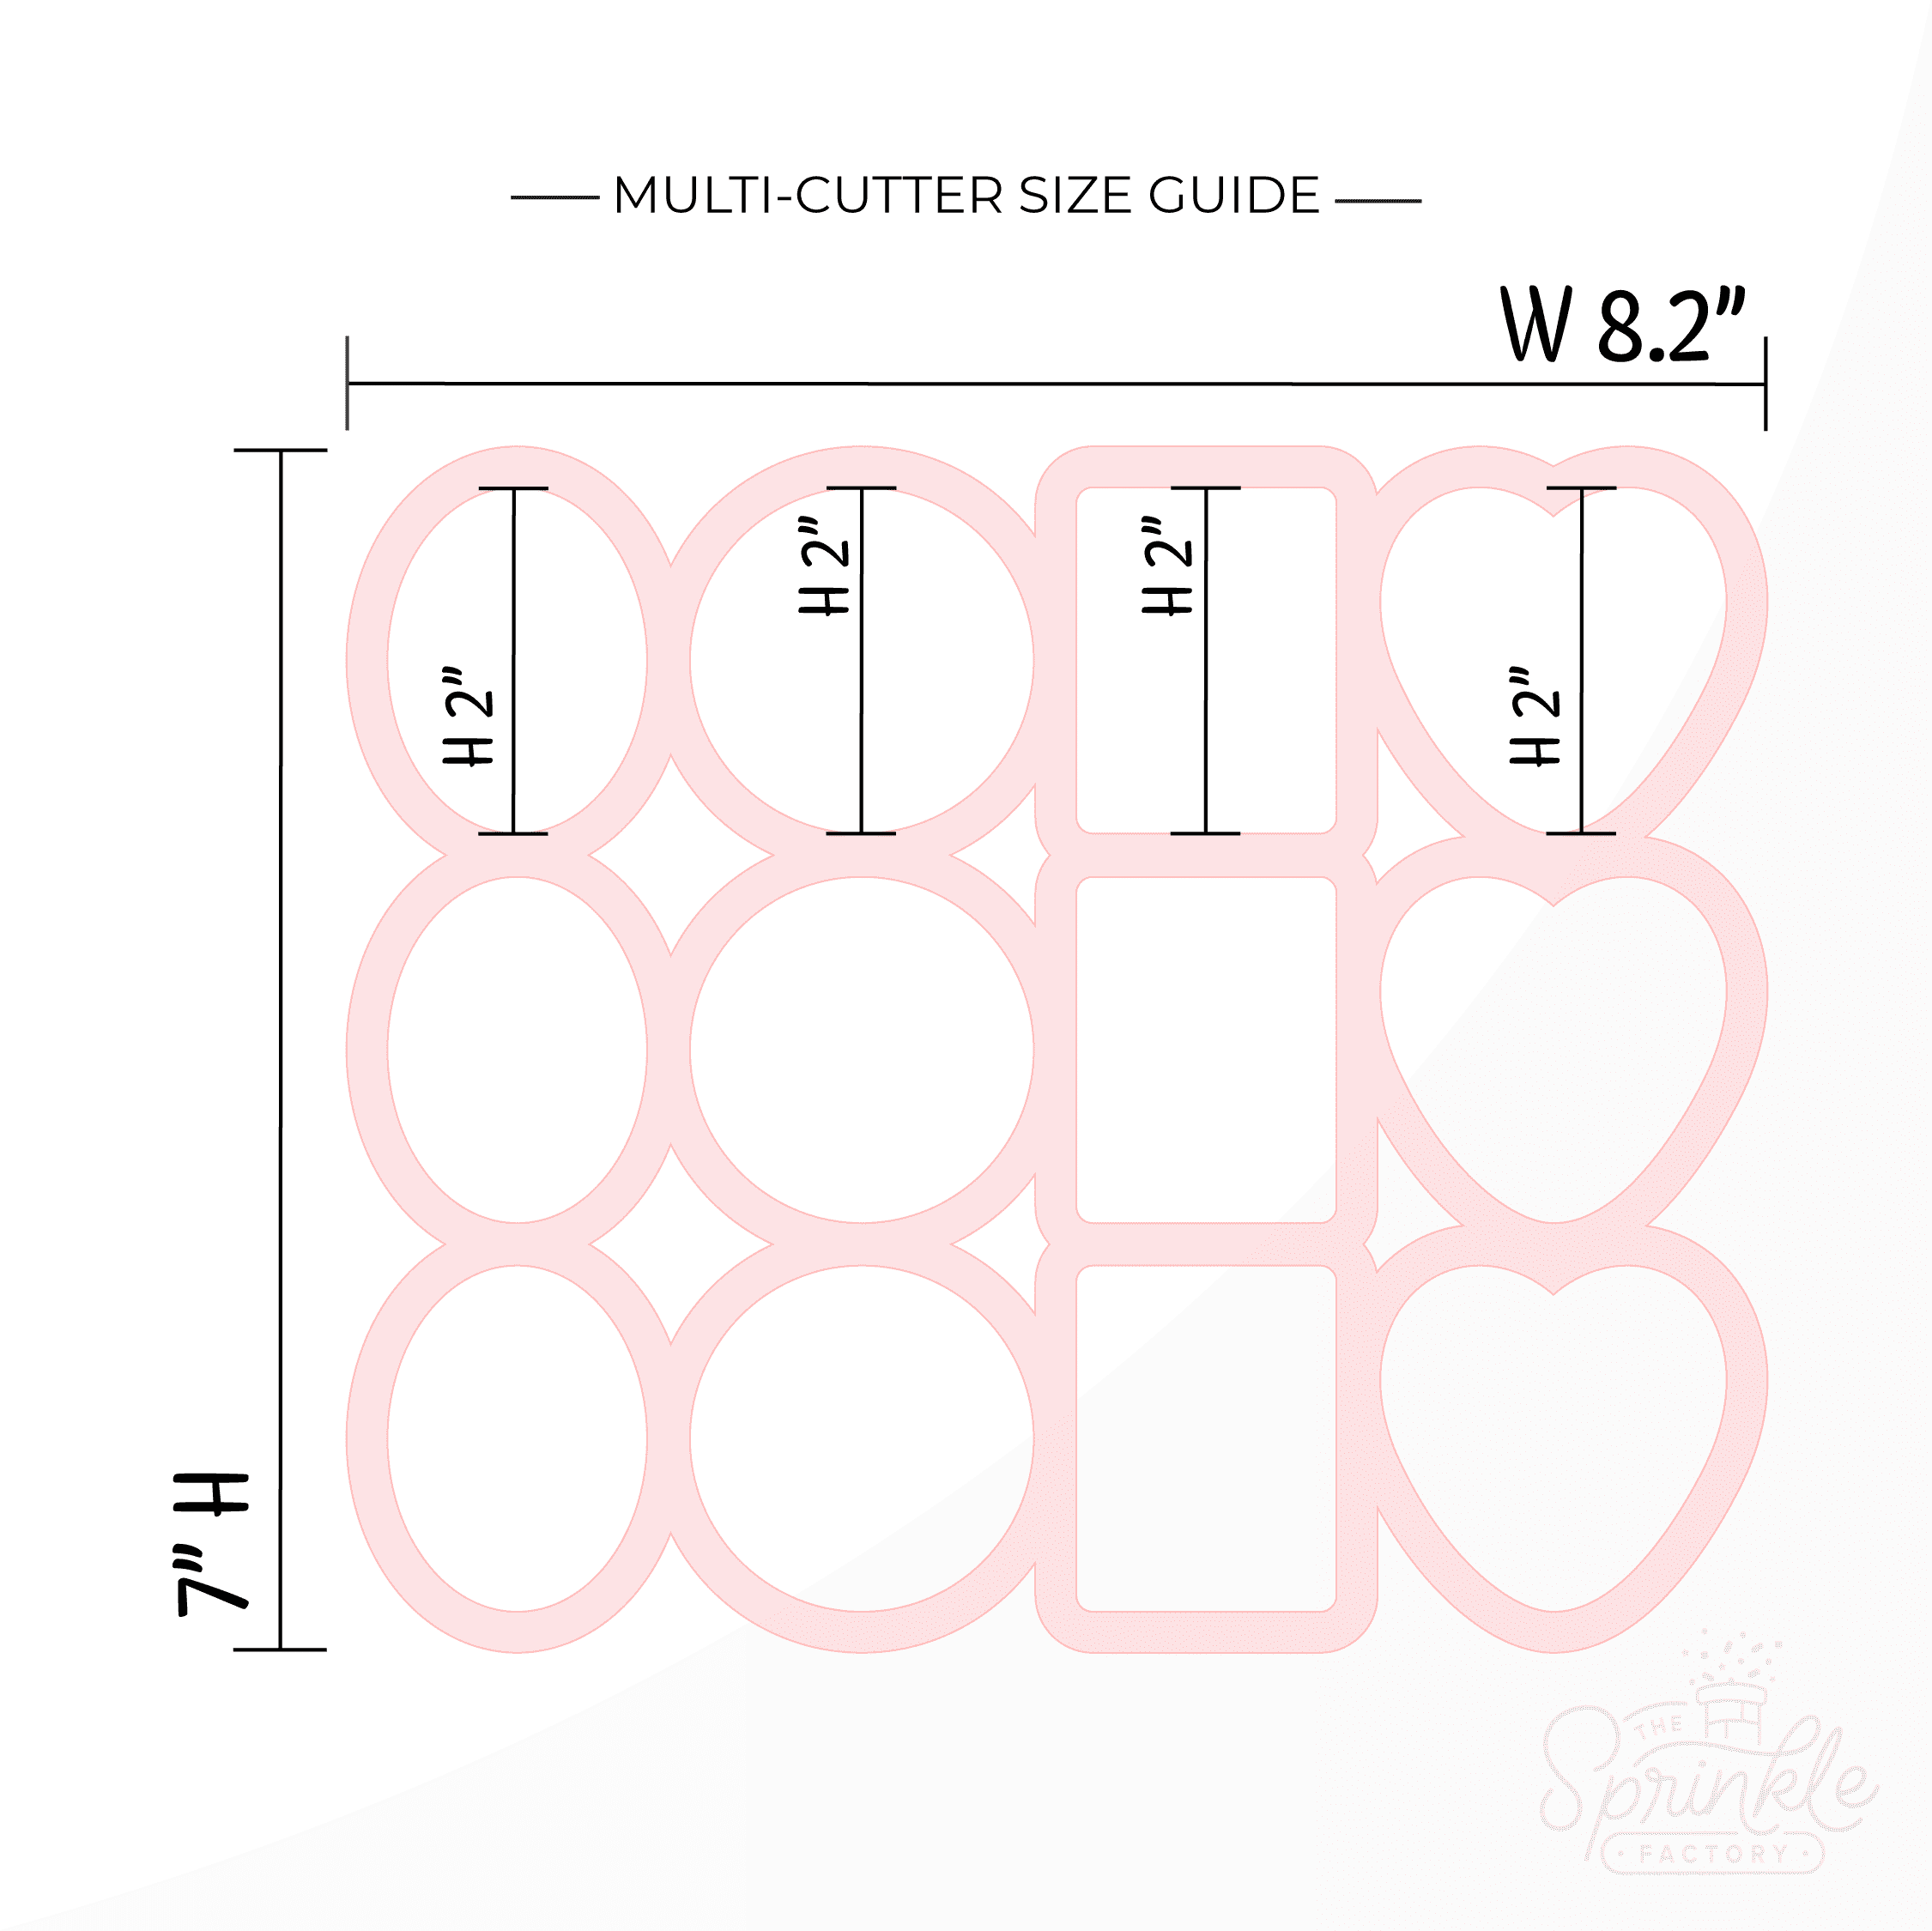 Graphic image of a pink multi cookie cutter with box of chocolates shapes and sizes listed.